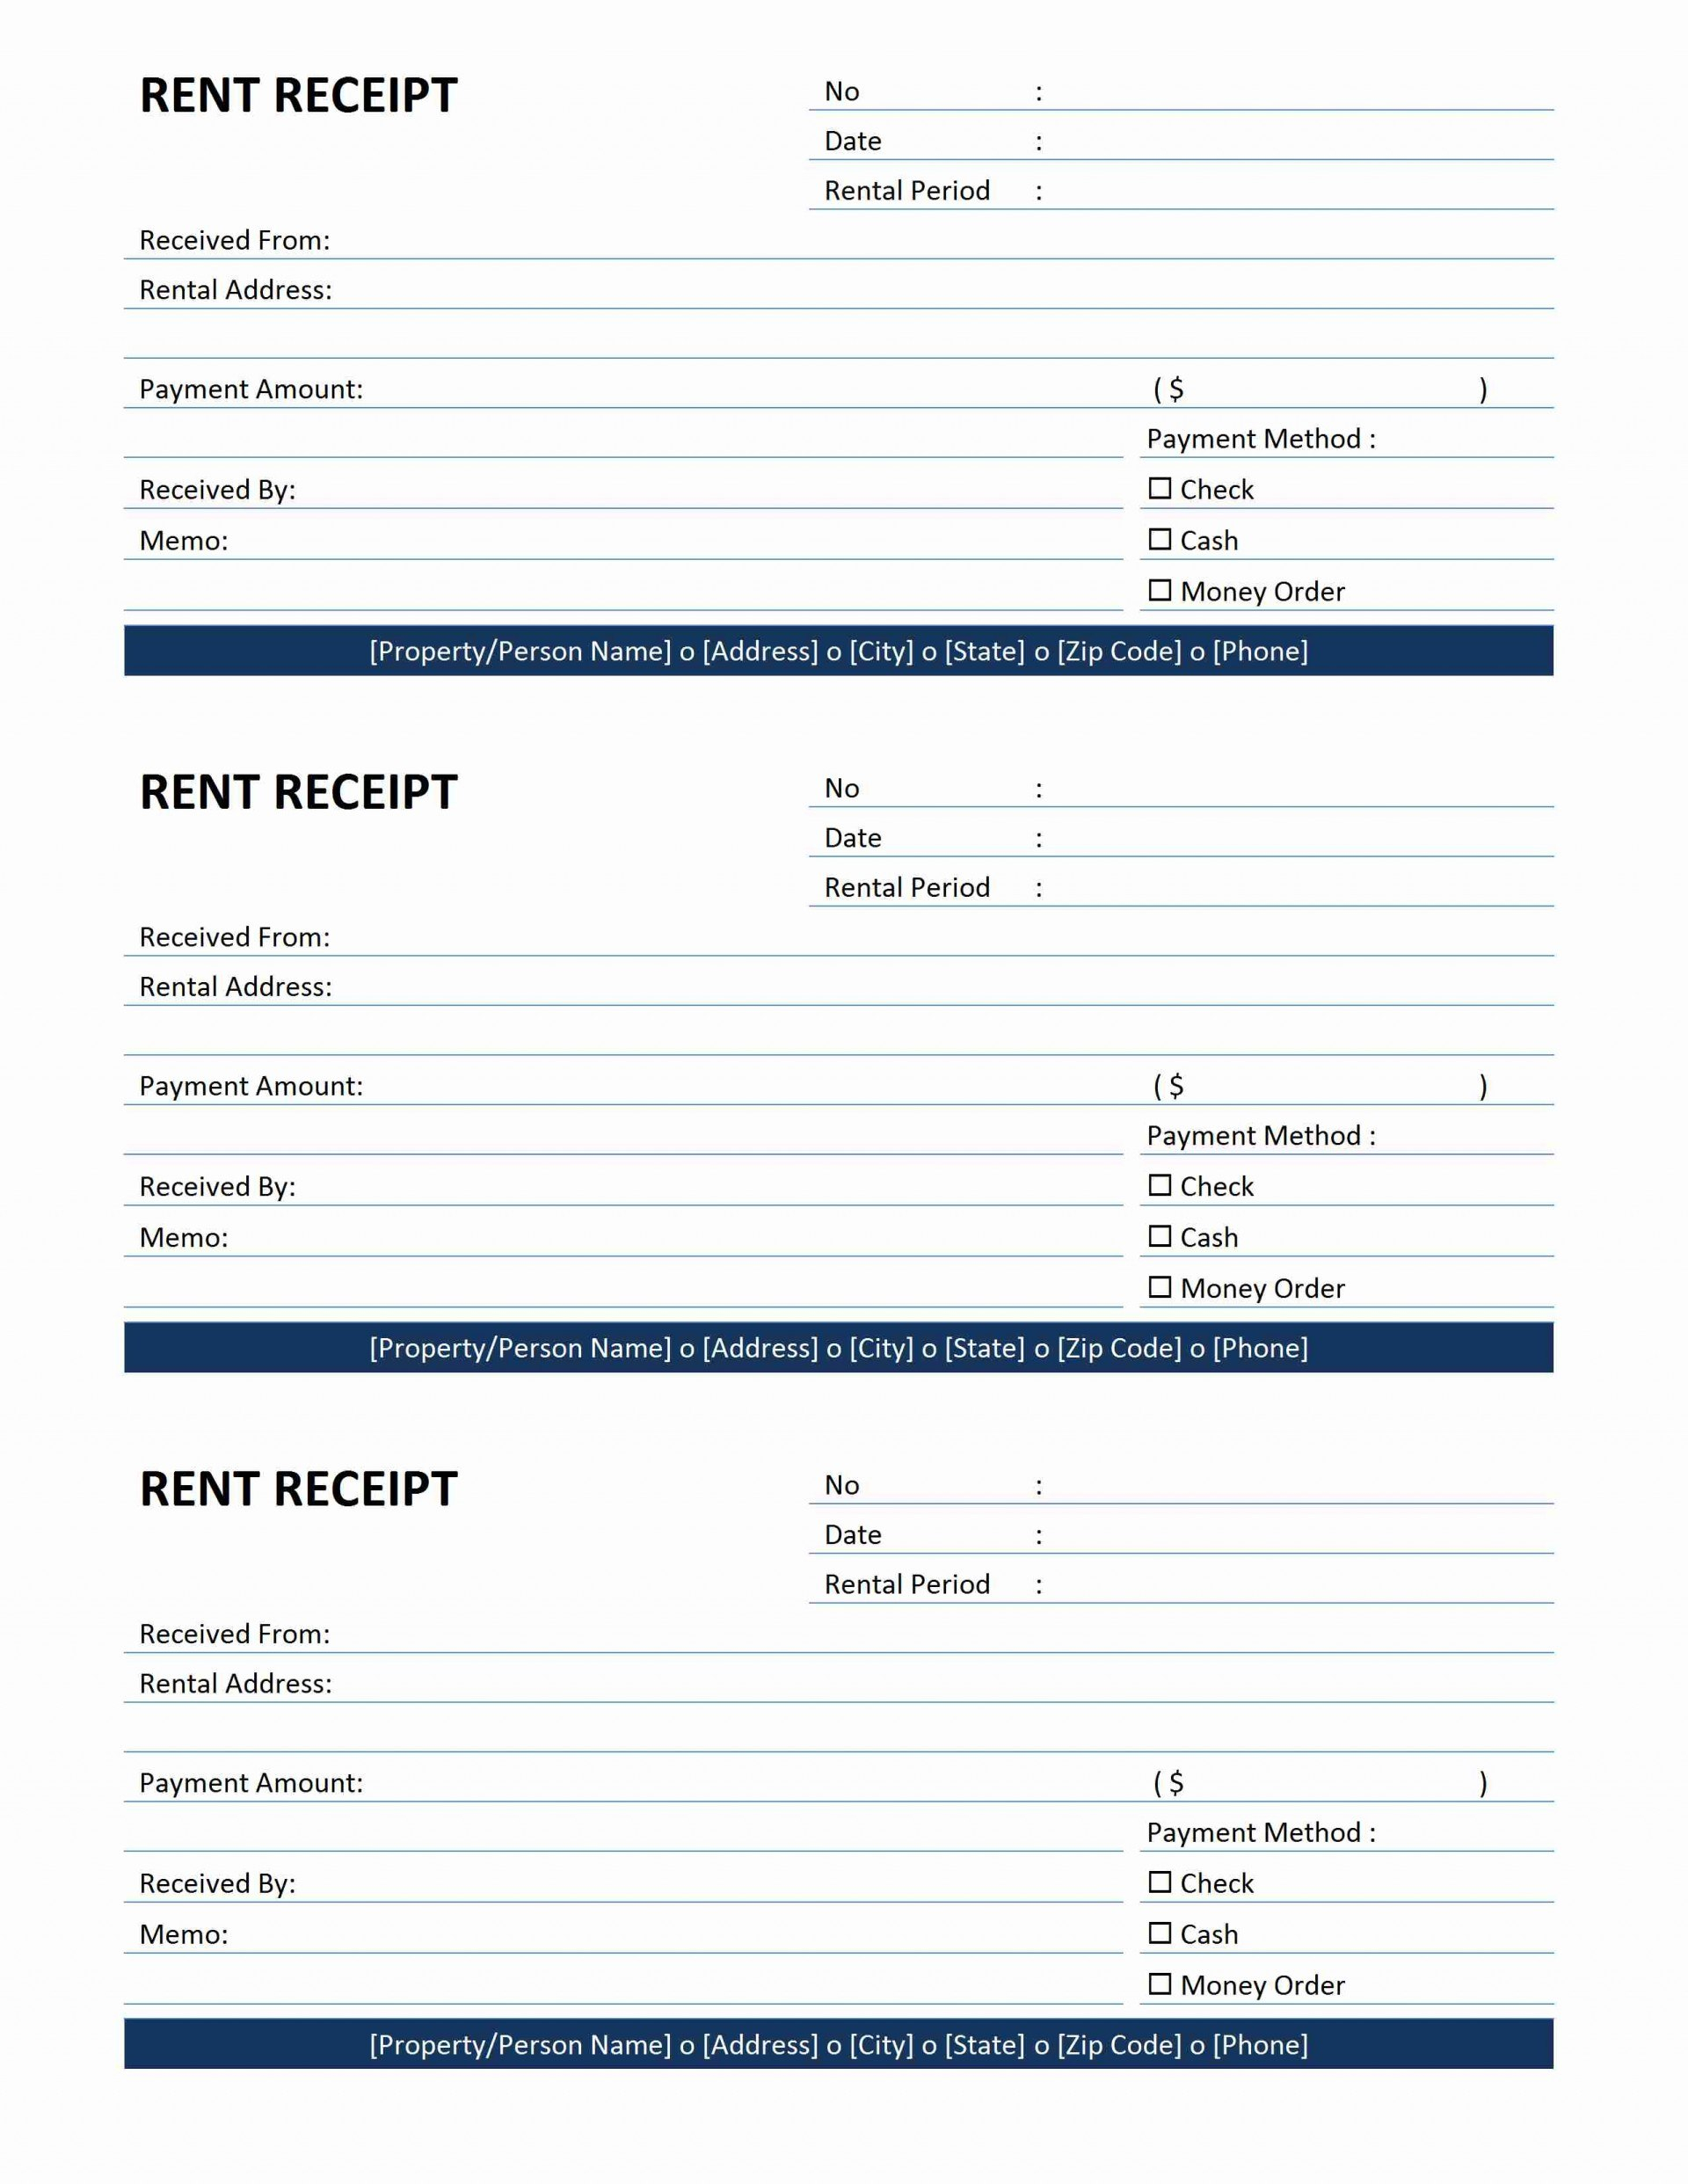 Monthly Rent Invoice Template Plan Shocking Templates Excel within Monthly Rent Invoice Template